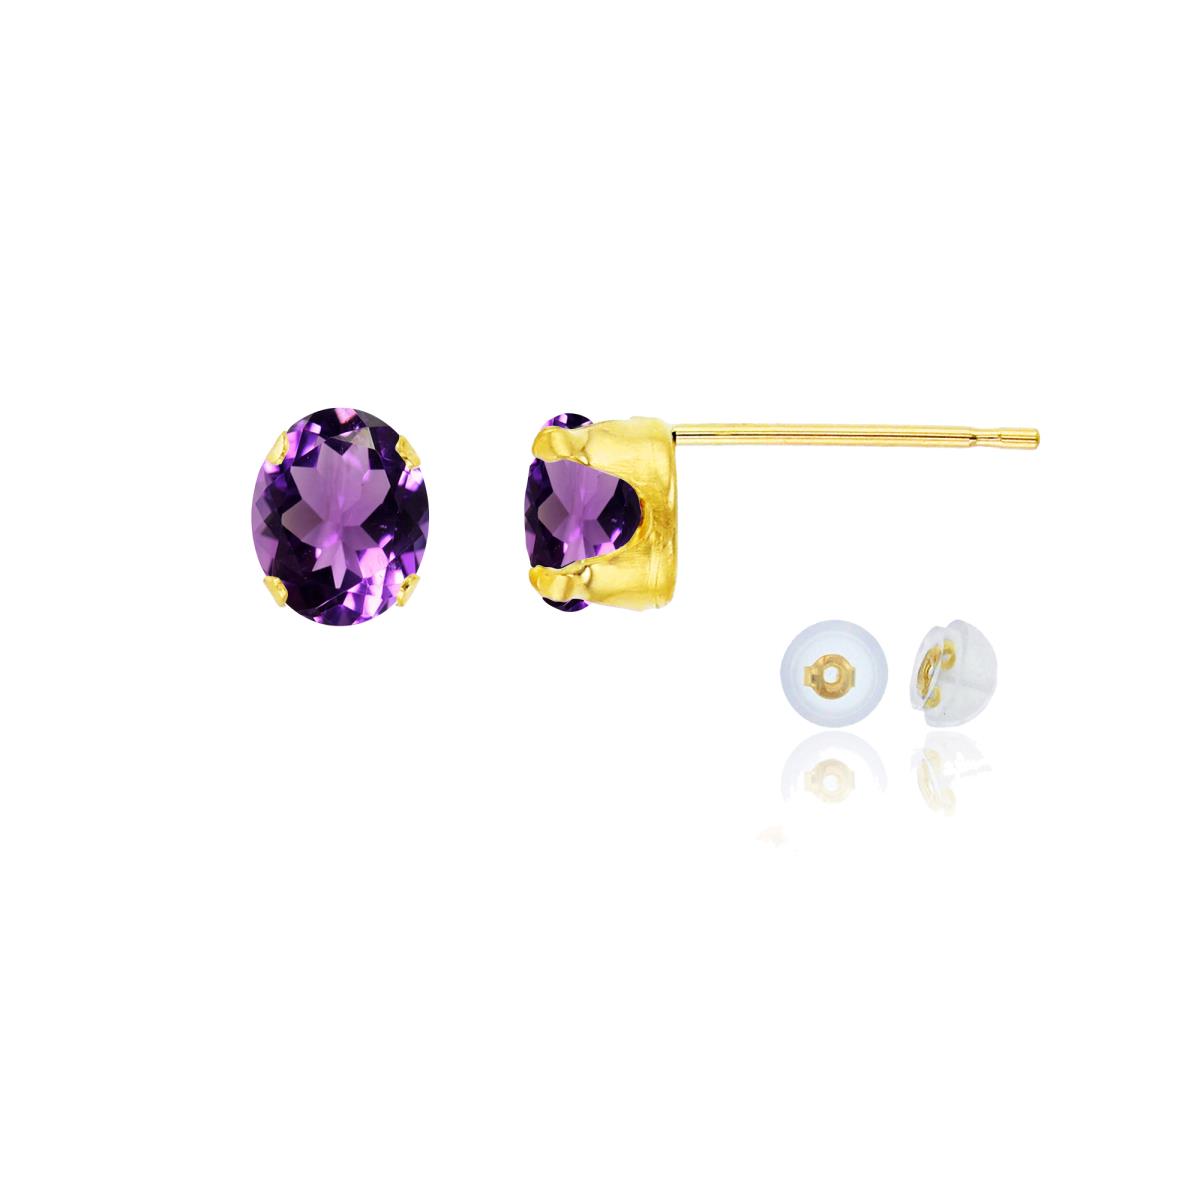 10K Yellow Gold 6x4mm Oval Amethyst Stud Earring with Silicone Back